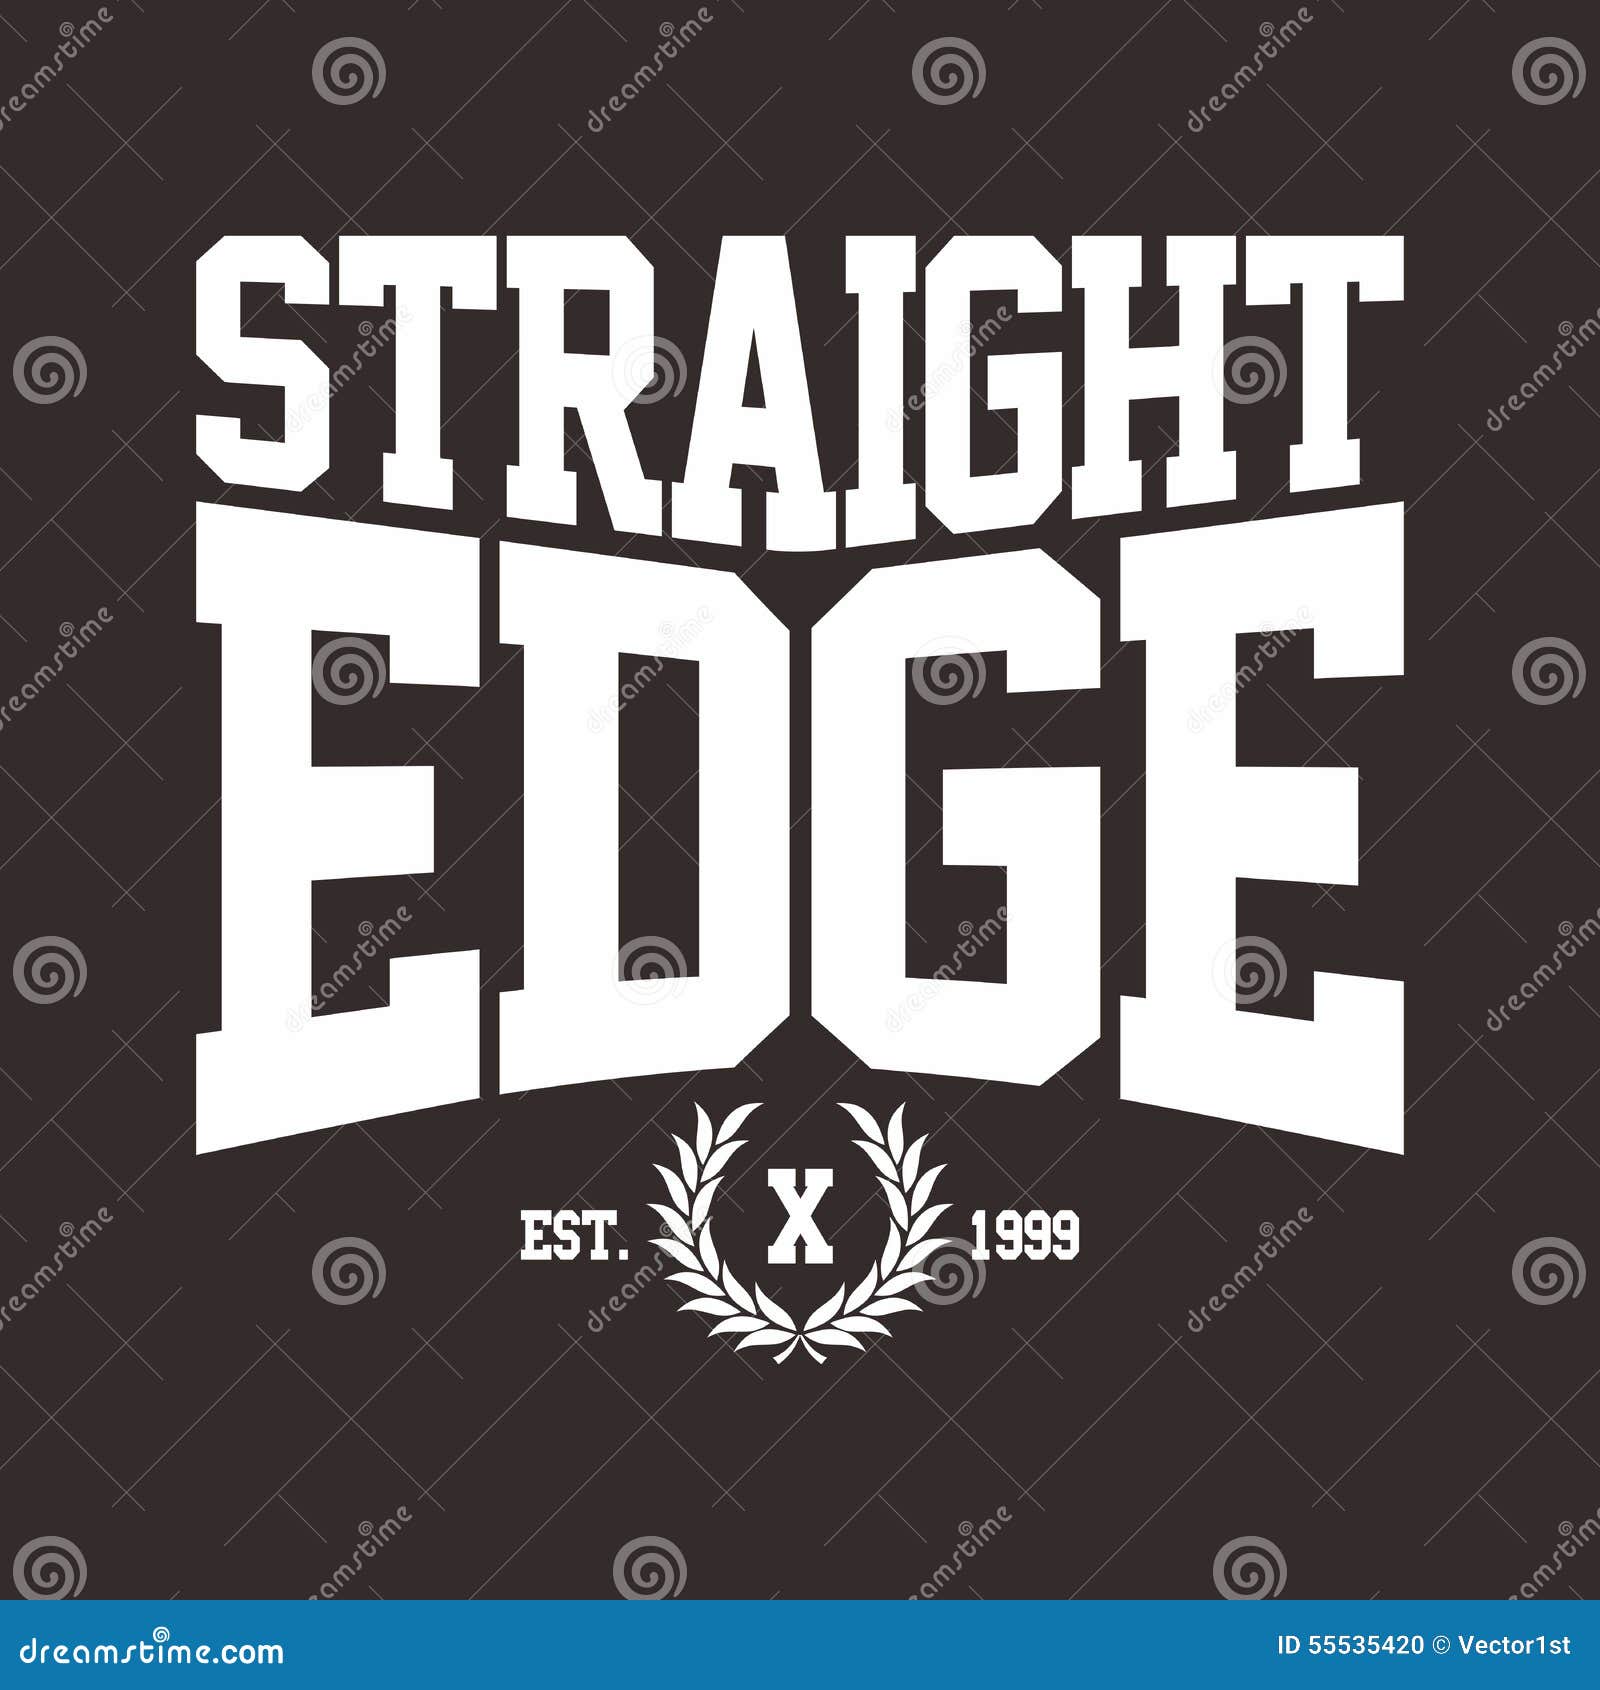 Black & White Vector Illustration of Straight Edge with T-square